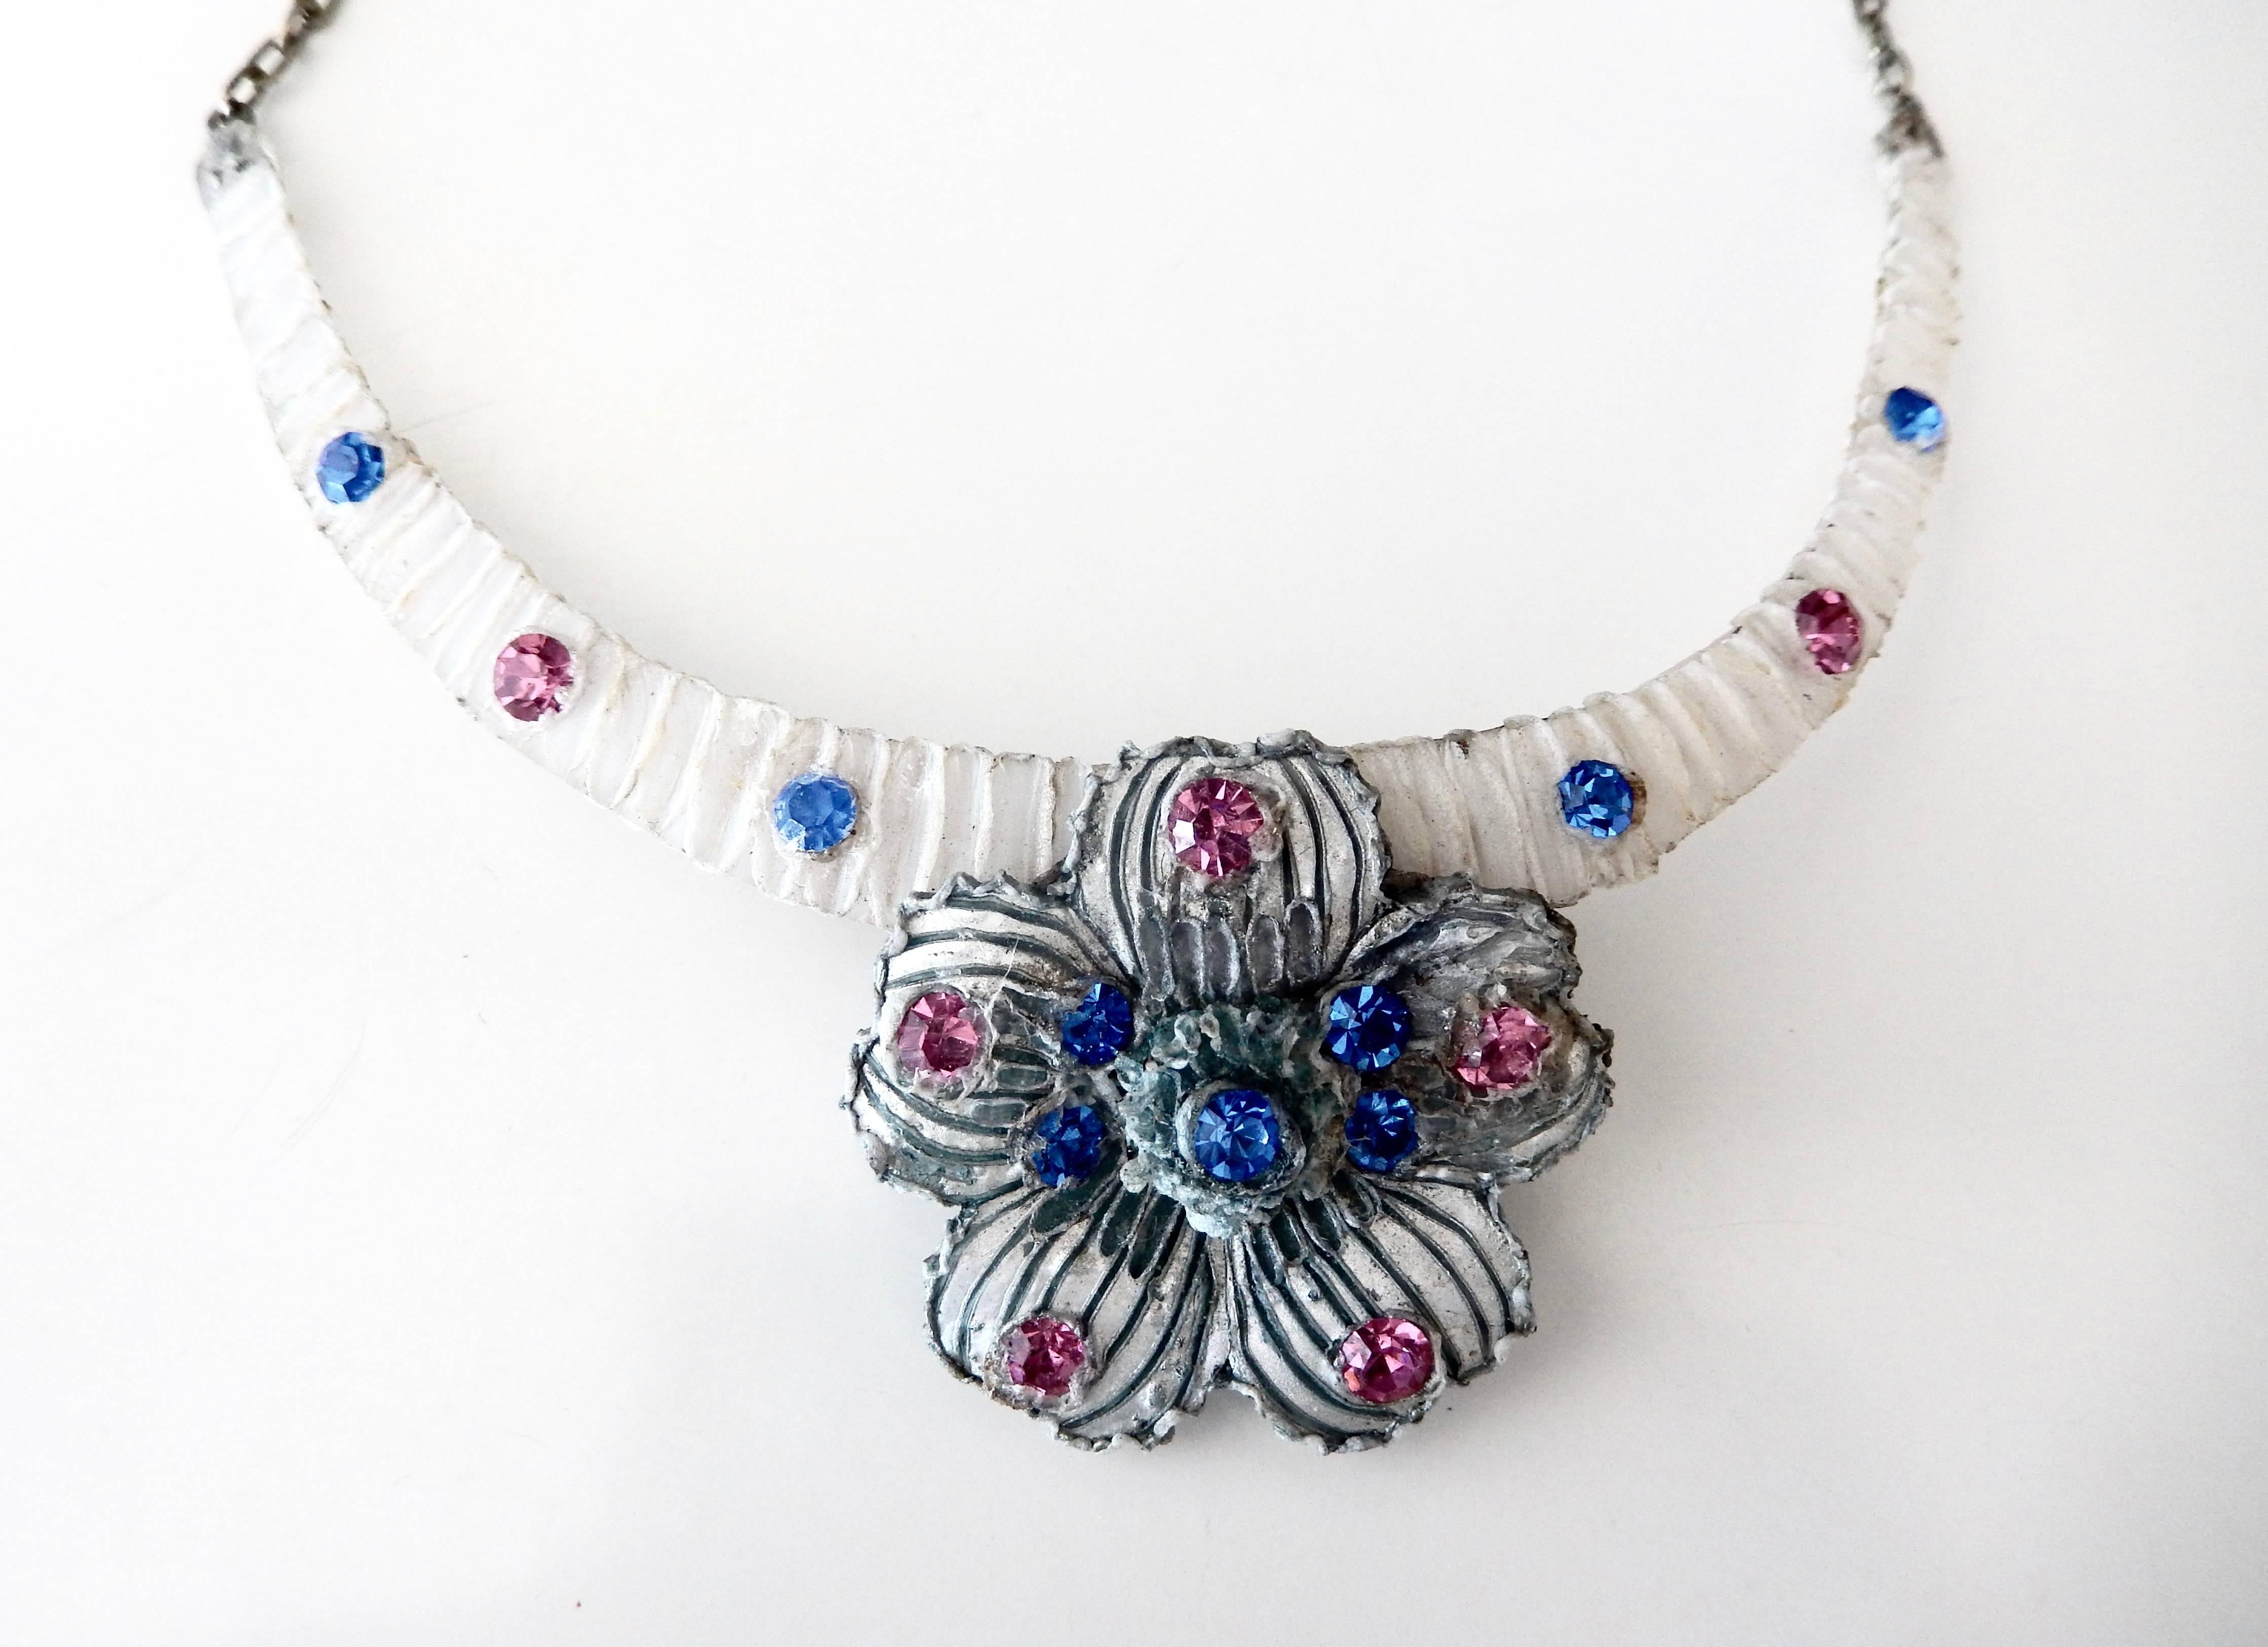 Handcrafted, sculptural necklace by French designer Henry Perichon, known for his innovative jewelry. The central floral pendant is constructed of silvered resin with pink and blue stones giving the necklace a dreamlike, magical appearance. A fine